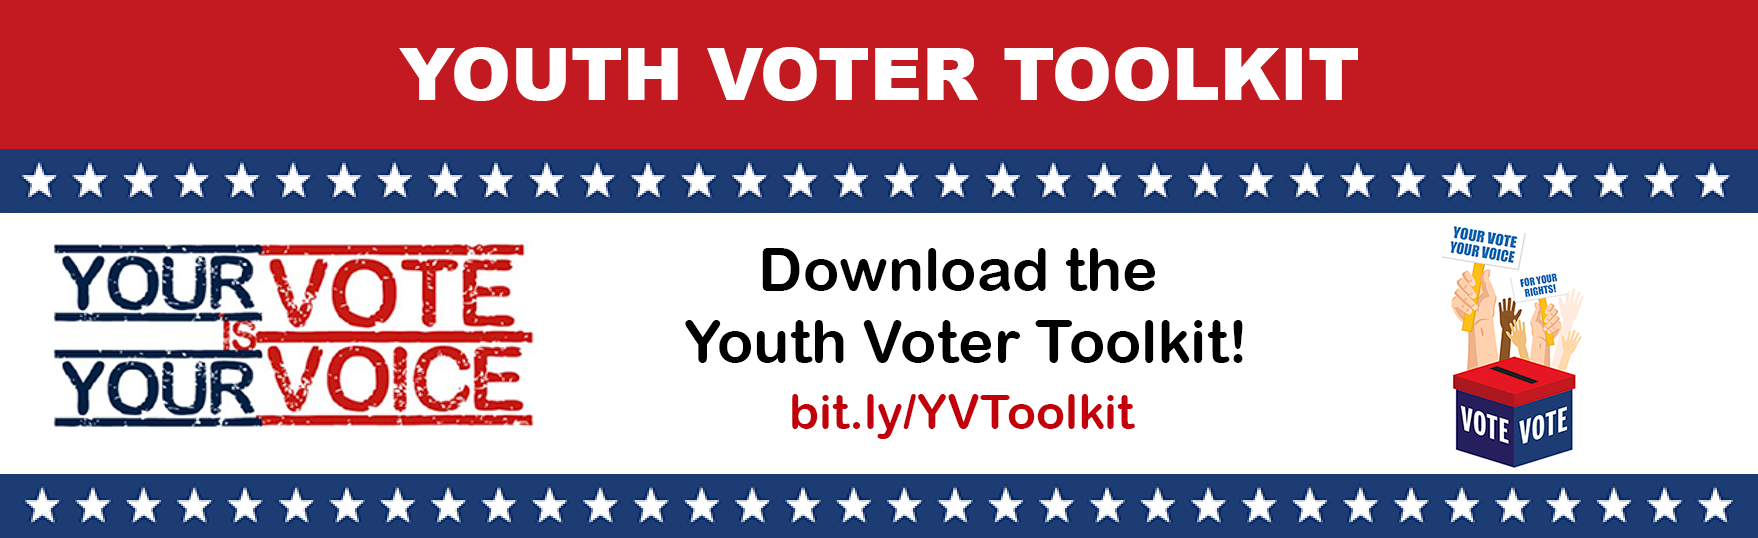 Visit Youth Voter Toolkit on google docs